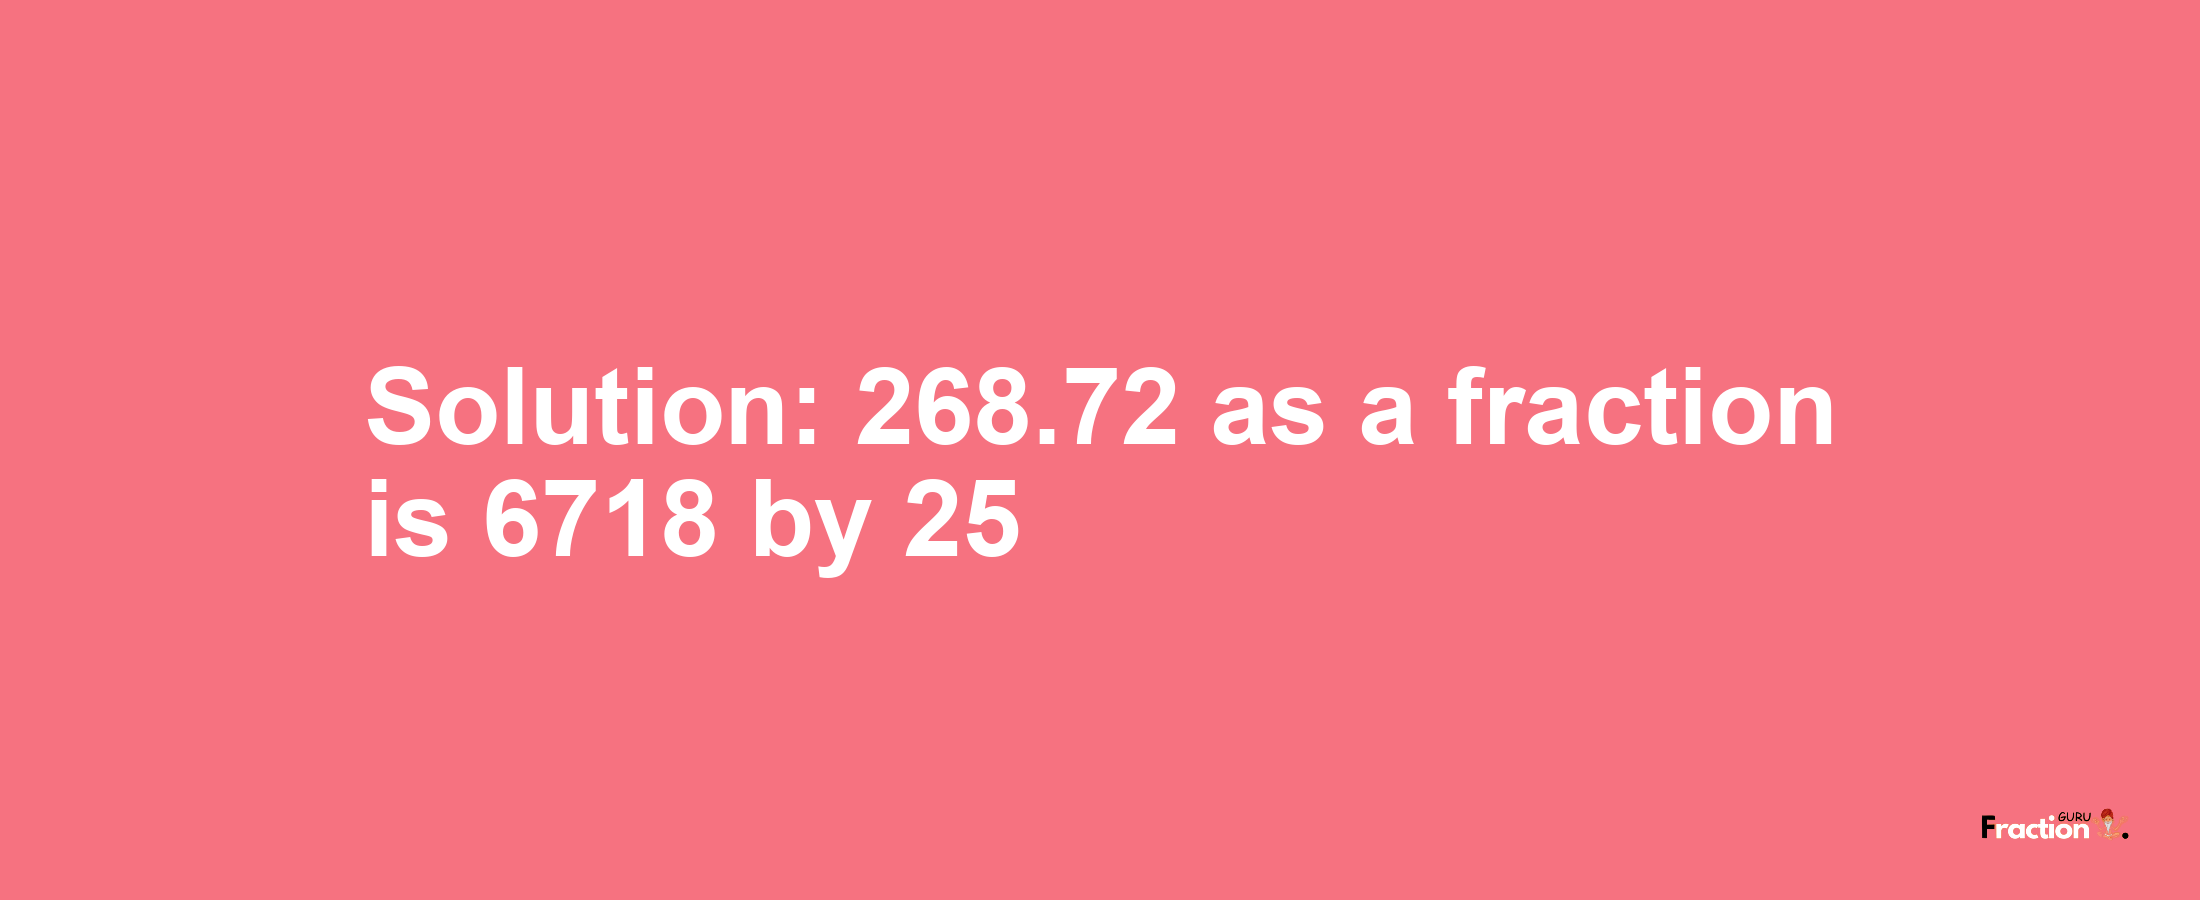 Solution:268.72 as a fraction is 6718/25